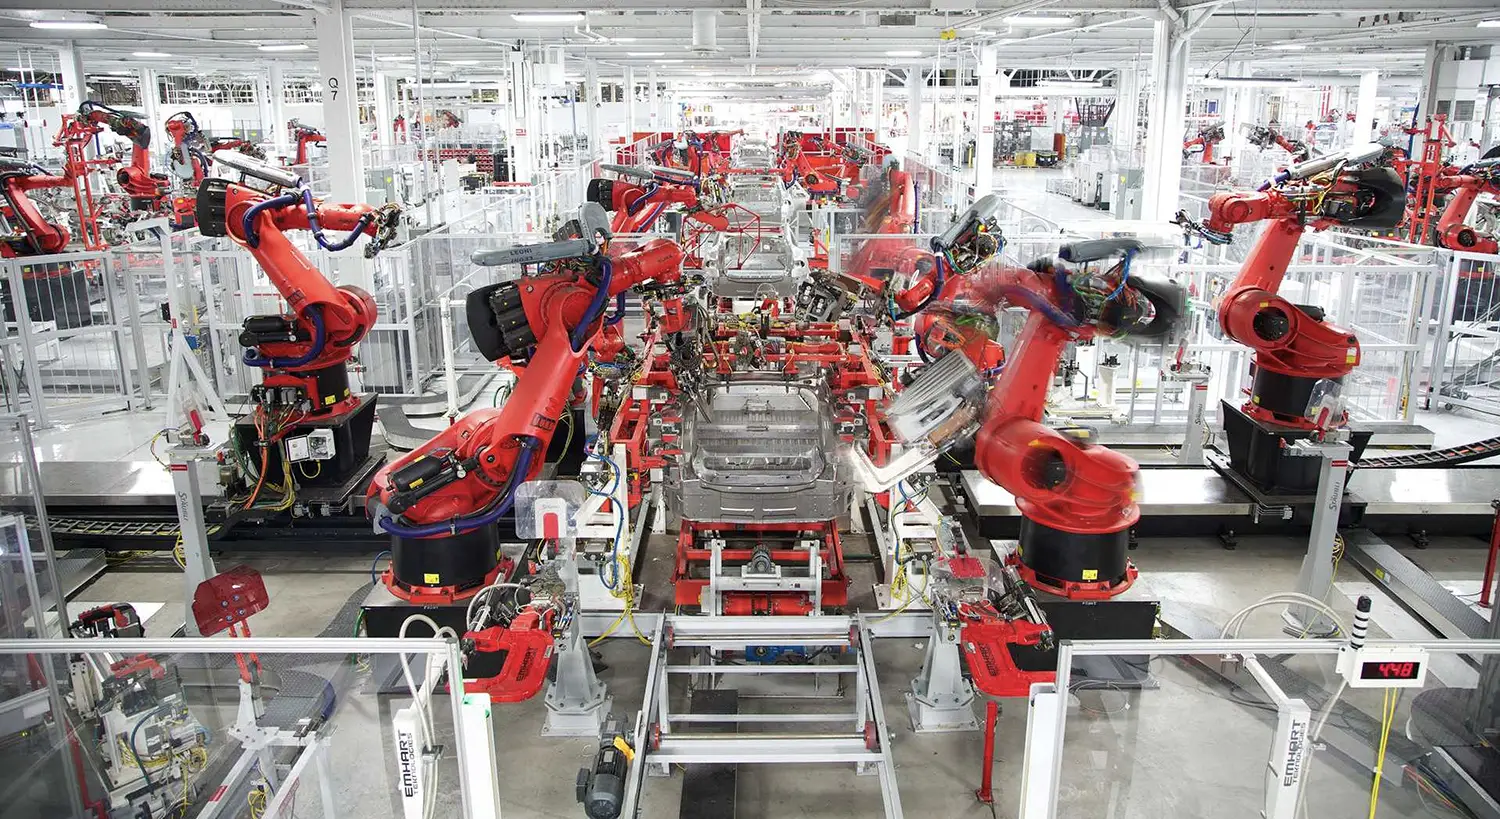 View of a factory floor. Large red robotic arms, in motion at work on vehicle chassis, are lined side by side until the back of the factory.
